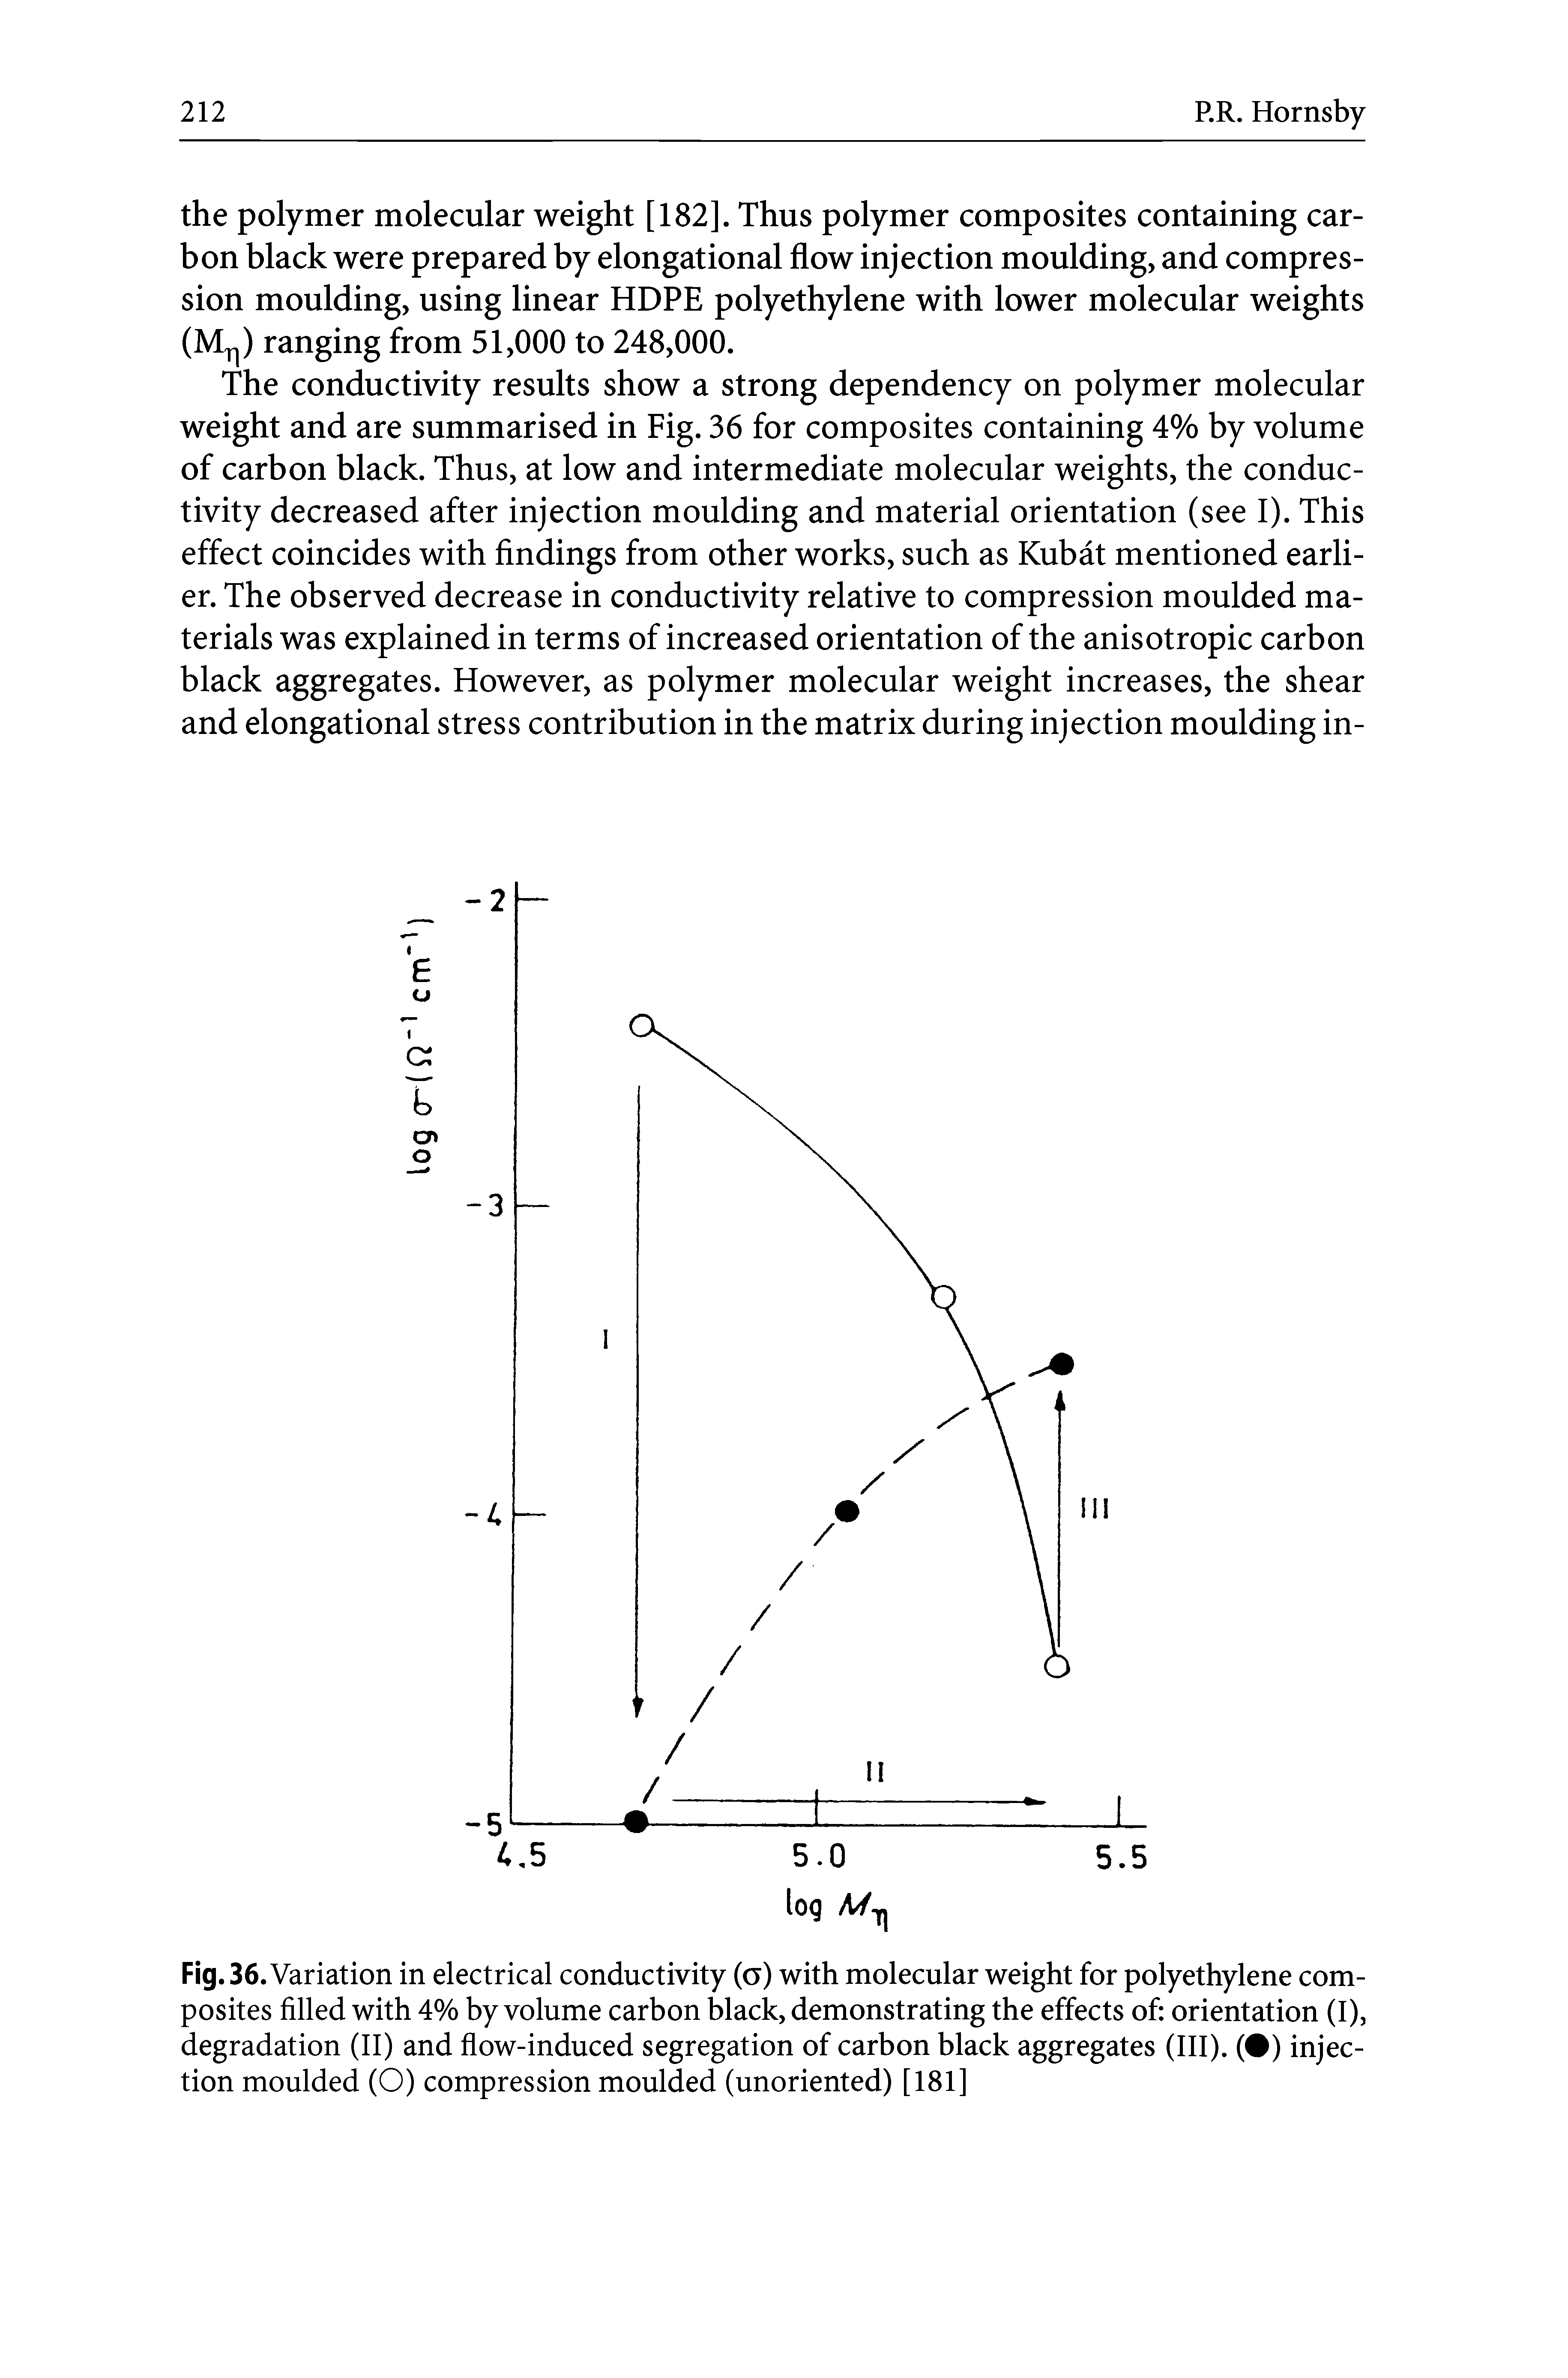 Fig.36. Variation in electrical conductivity (o) with molecular weight for polyethylene composites filled with 4% by volume carbon black, demonstrating the effects of orientation (I), degradation (II) and flow-induced segregation of carbon black aggregates (III). ( ) injection moulded (O) compression moulded (unoriented) [181]...